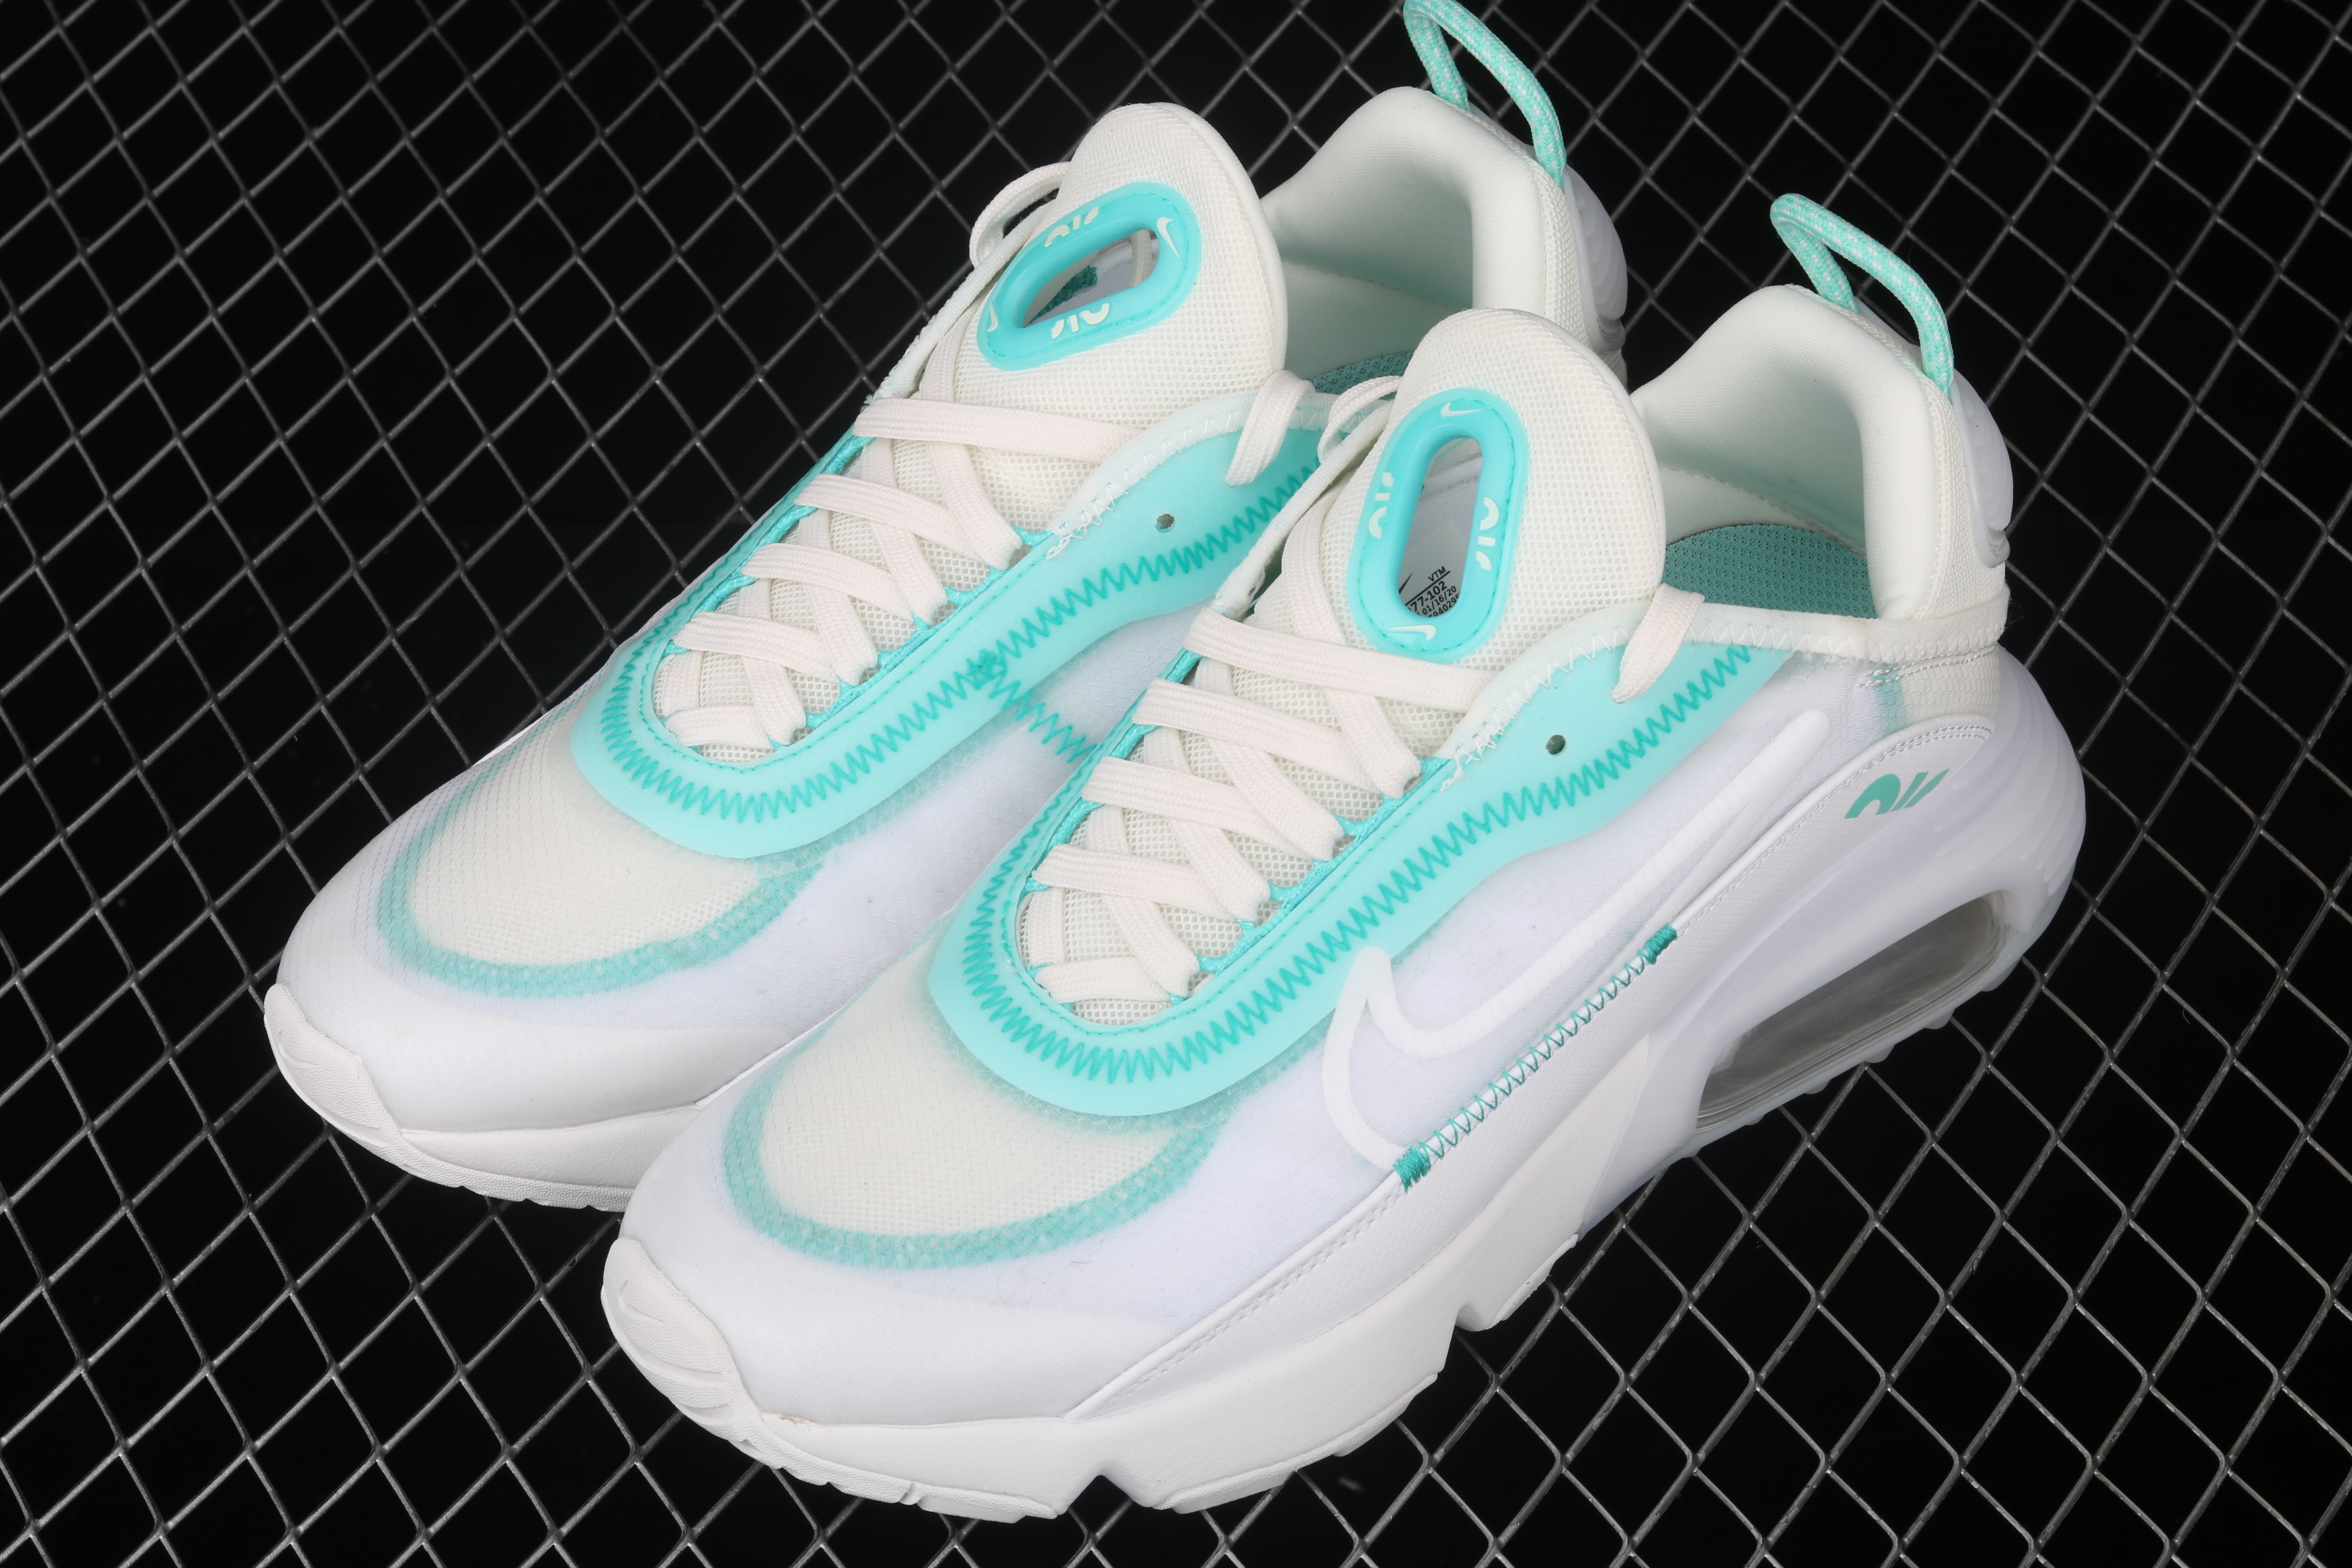 Nike Air Max 2090 White Blue Shoes - Click Image to Close